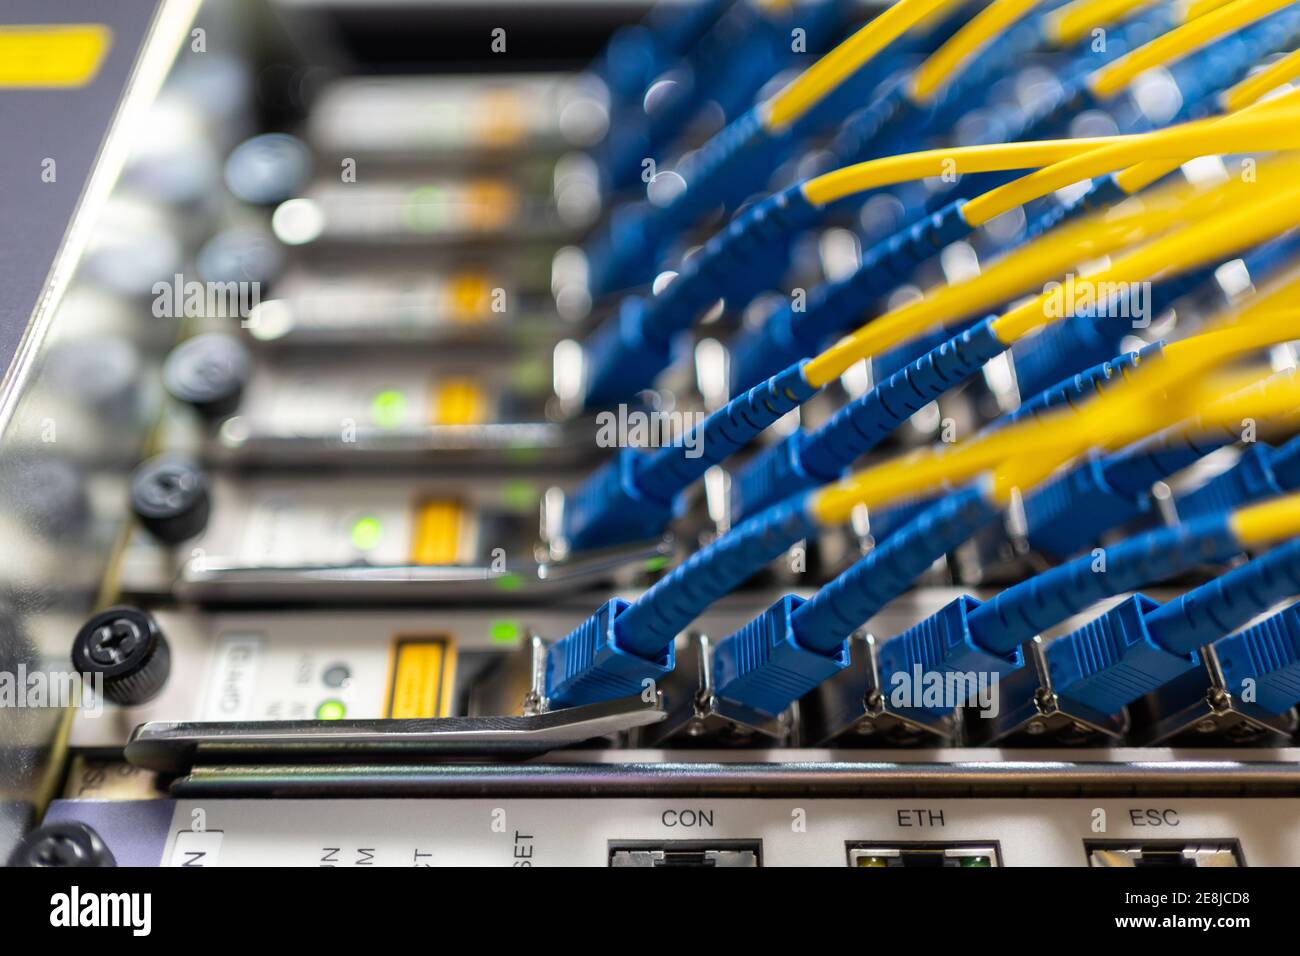 Control panel of optical fiber wires installed in communications room for providing process and network access Stock Photo